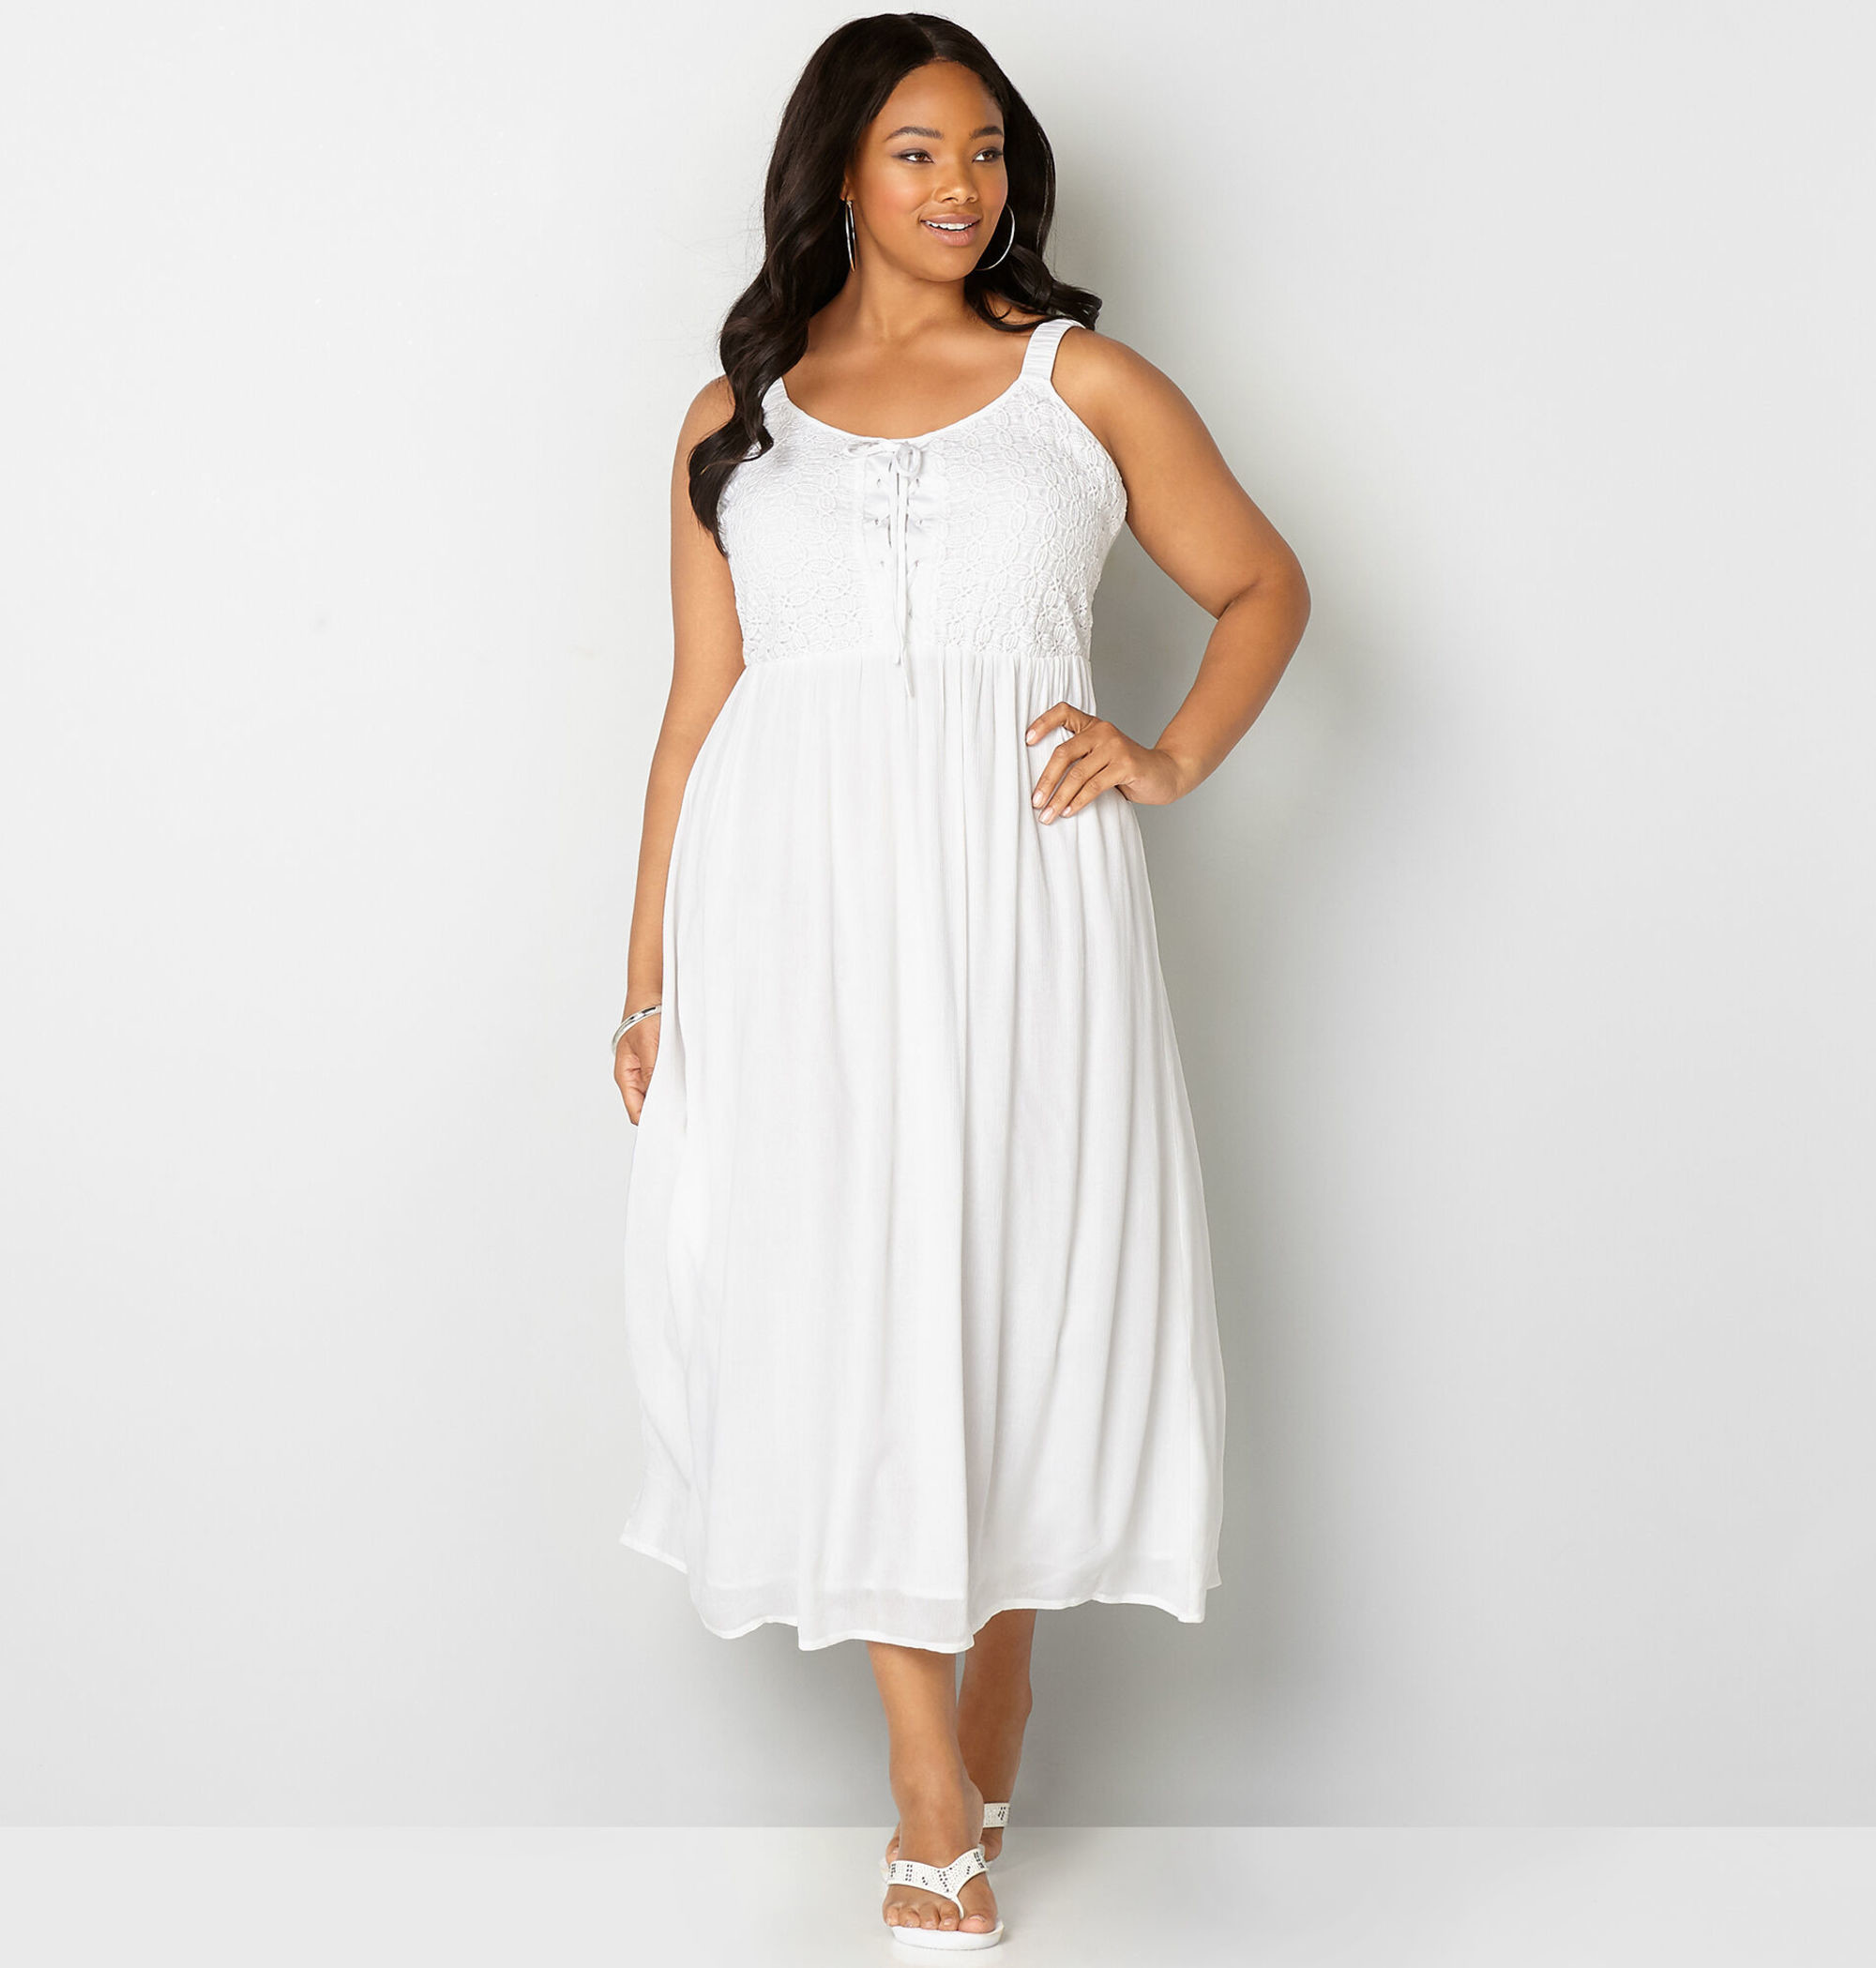 All White Plus Size Summer Outfits